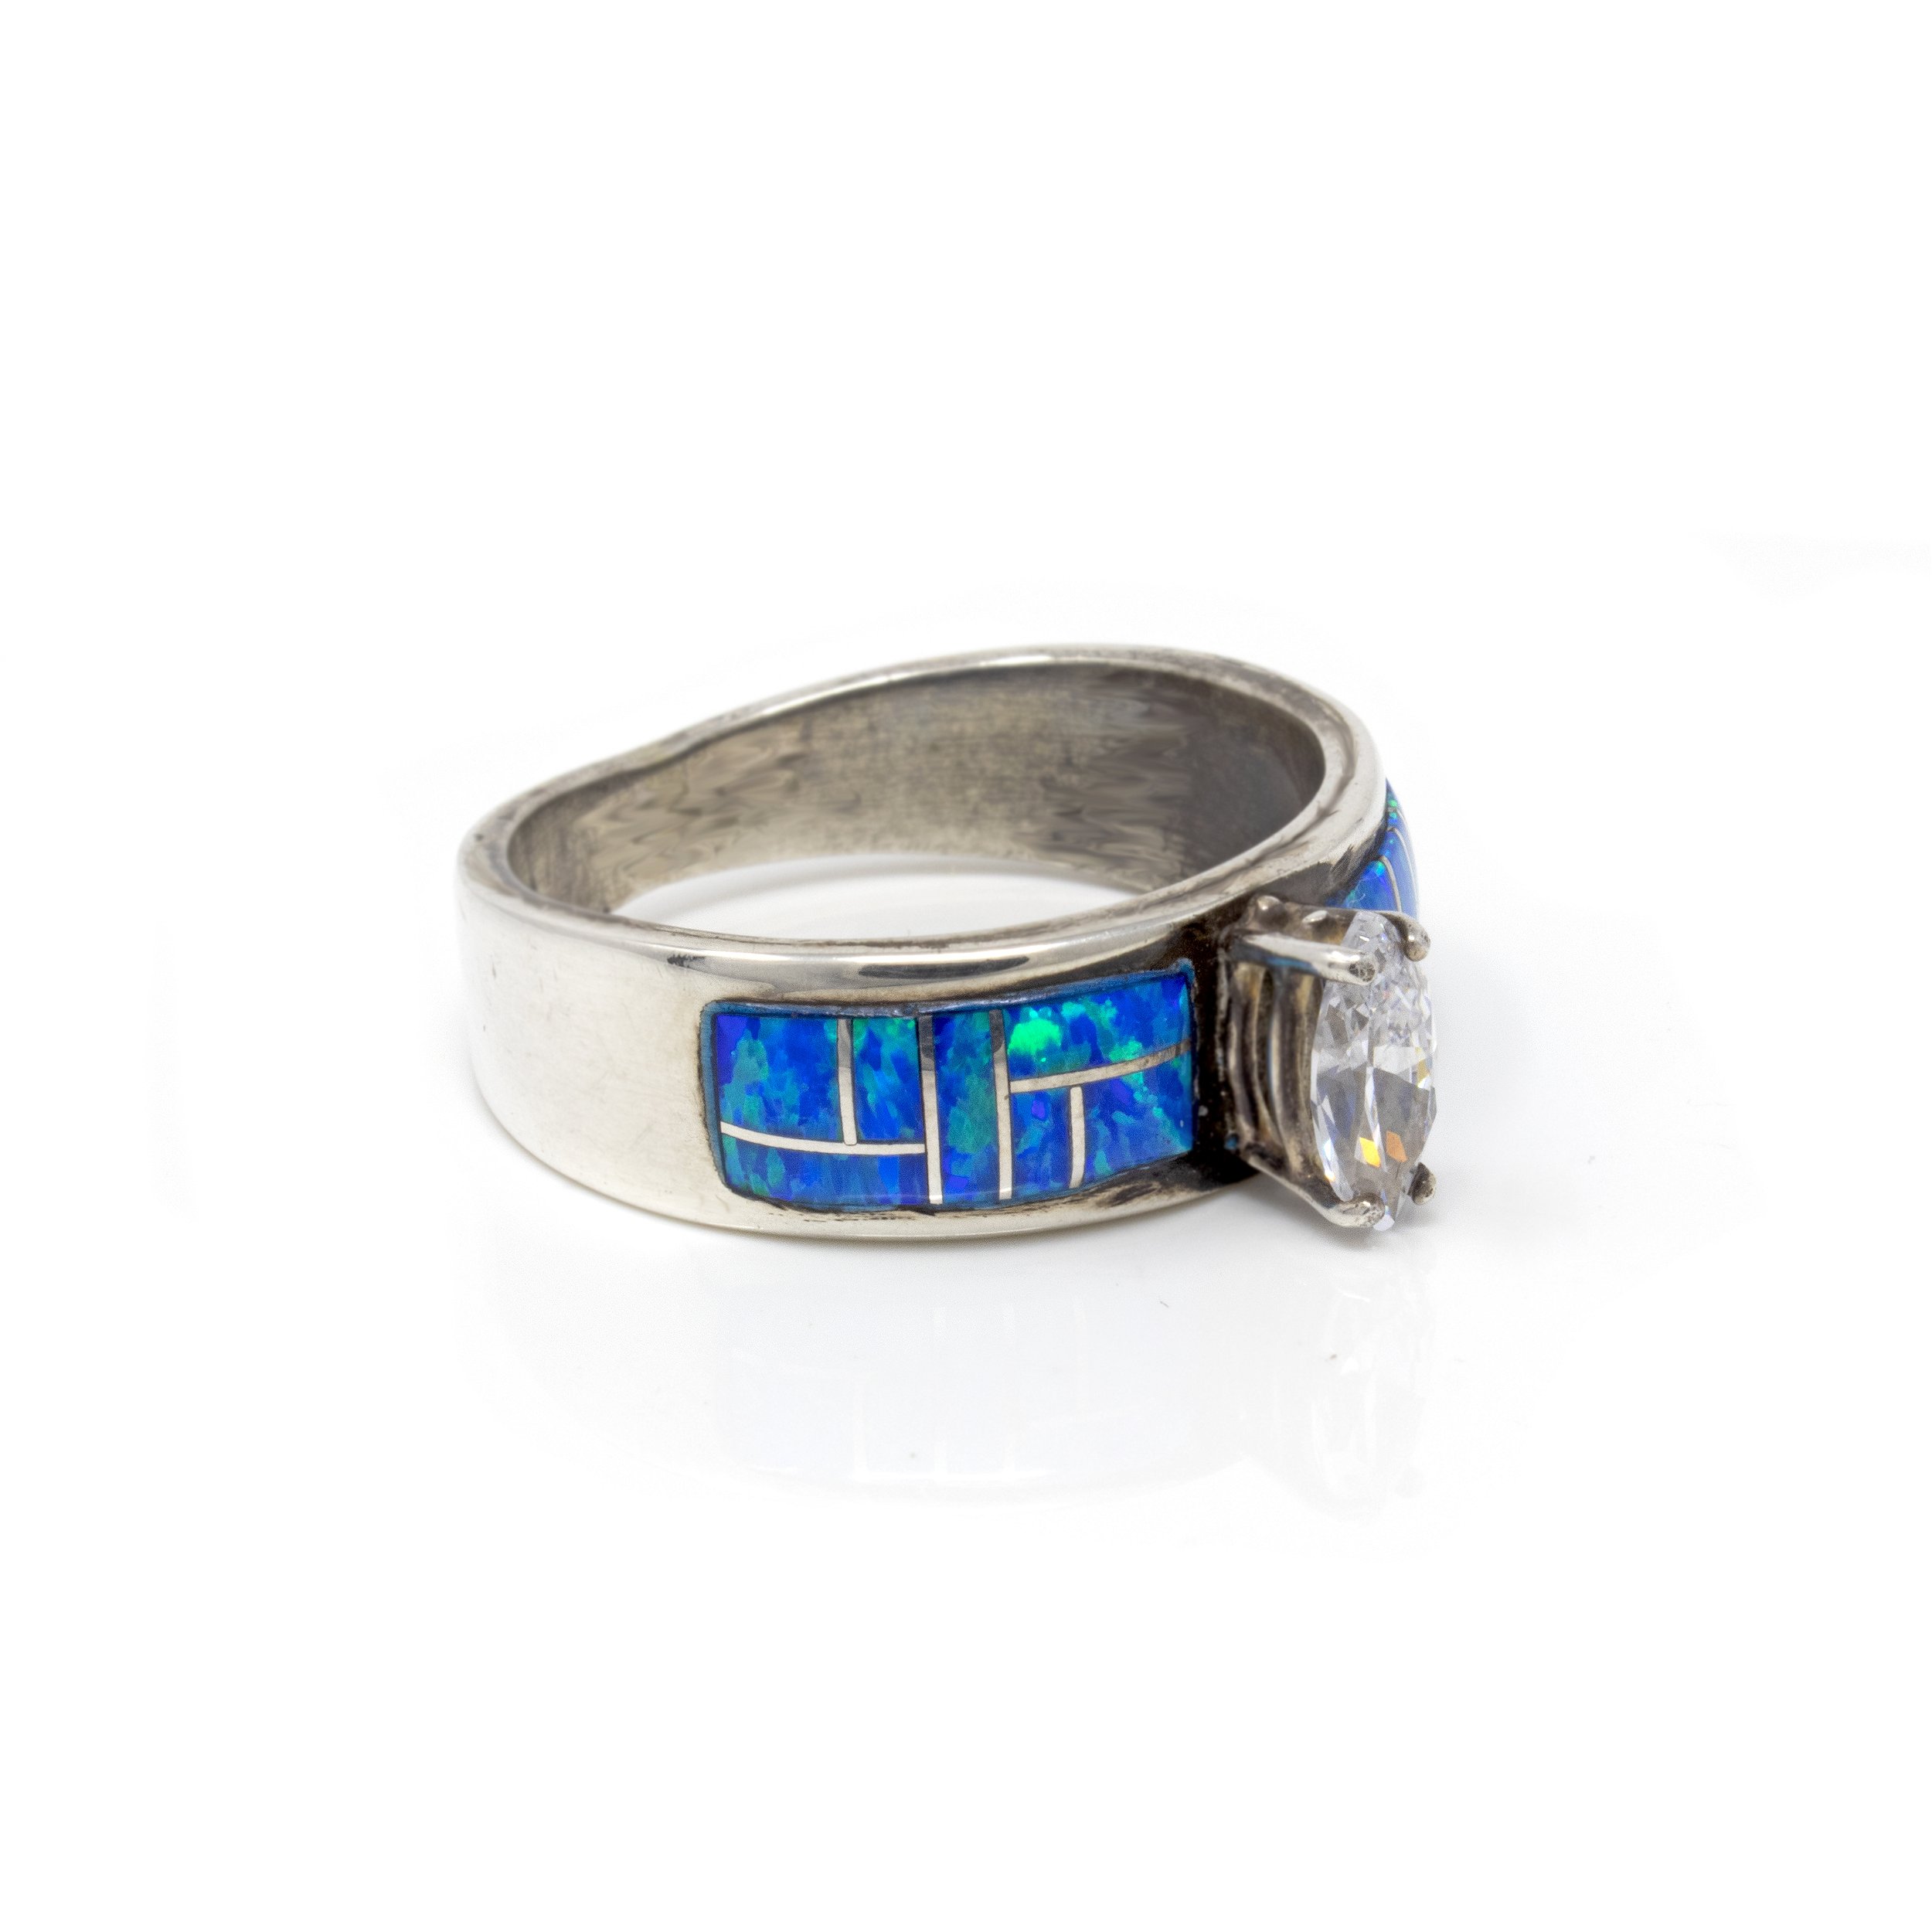 Blue Opal Ring Size 10 - Band Top Rectangular Inlay With Silver Channeling & Prong Set Cz Crystal Marquis